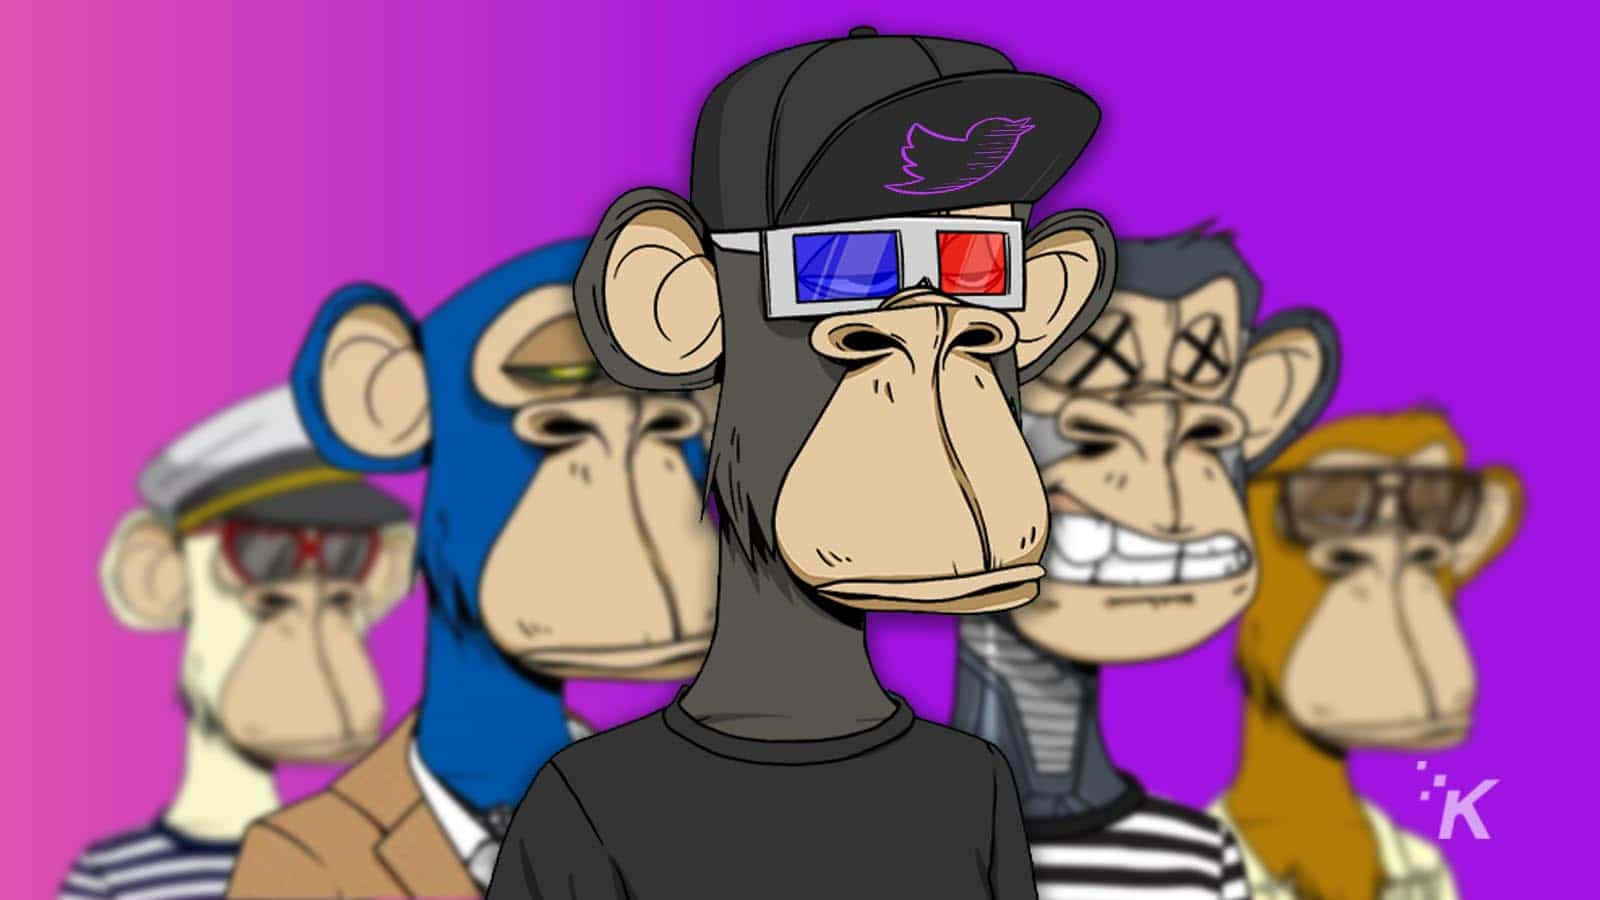 A Group Of Monkeys With Glasses And Hats Wallpaper